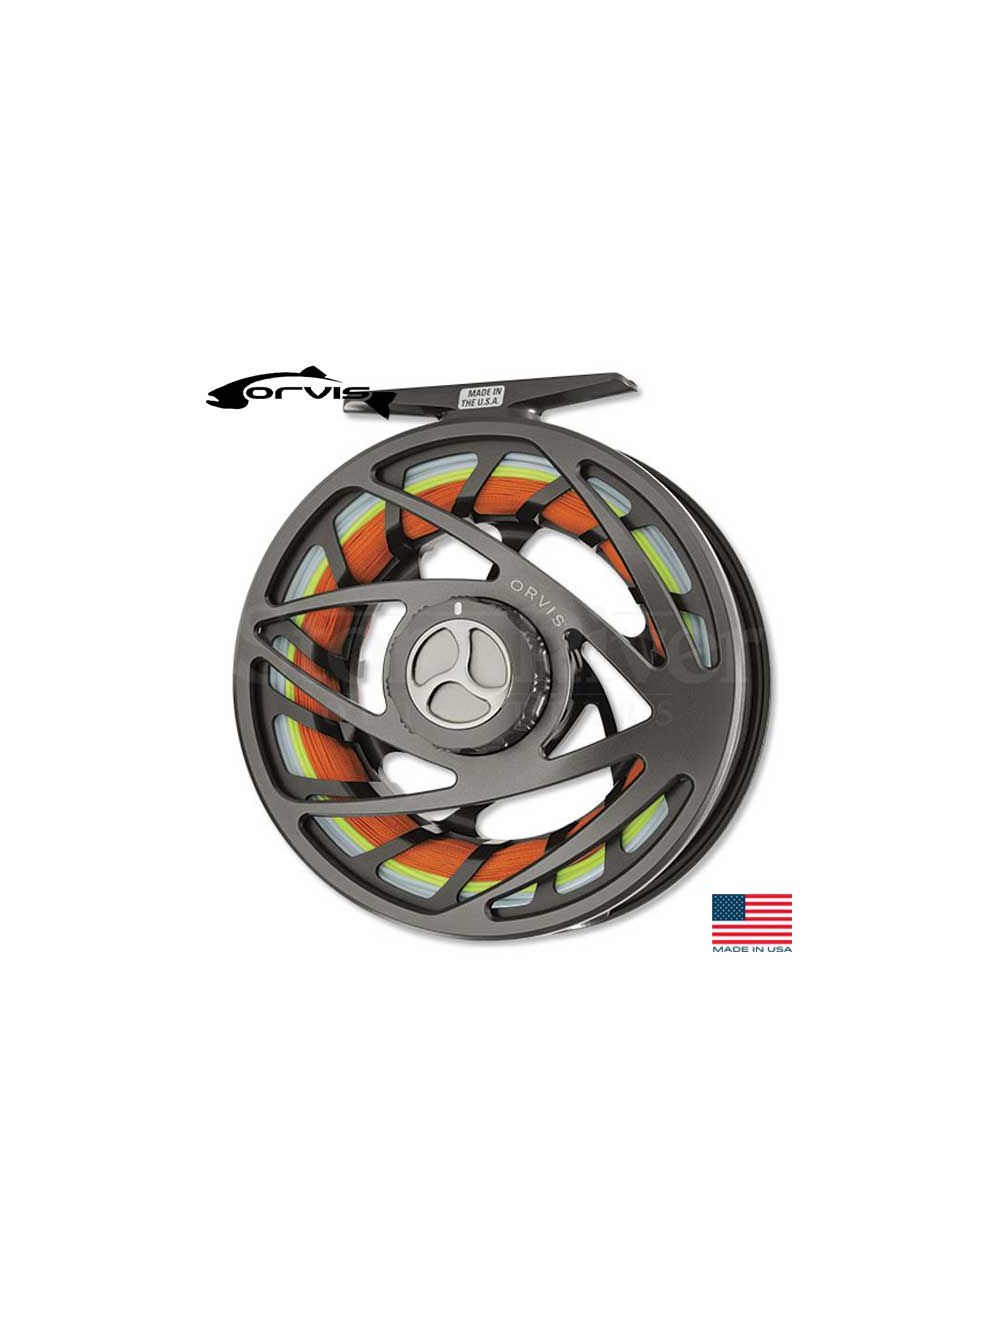 Orvis USA Mirage Fly Reels (Pewter)